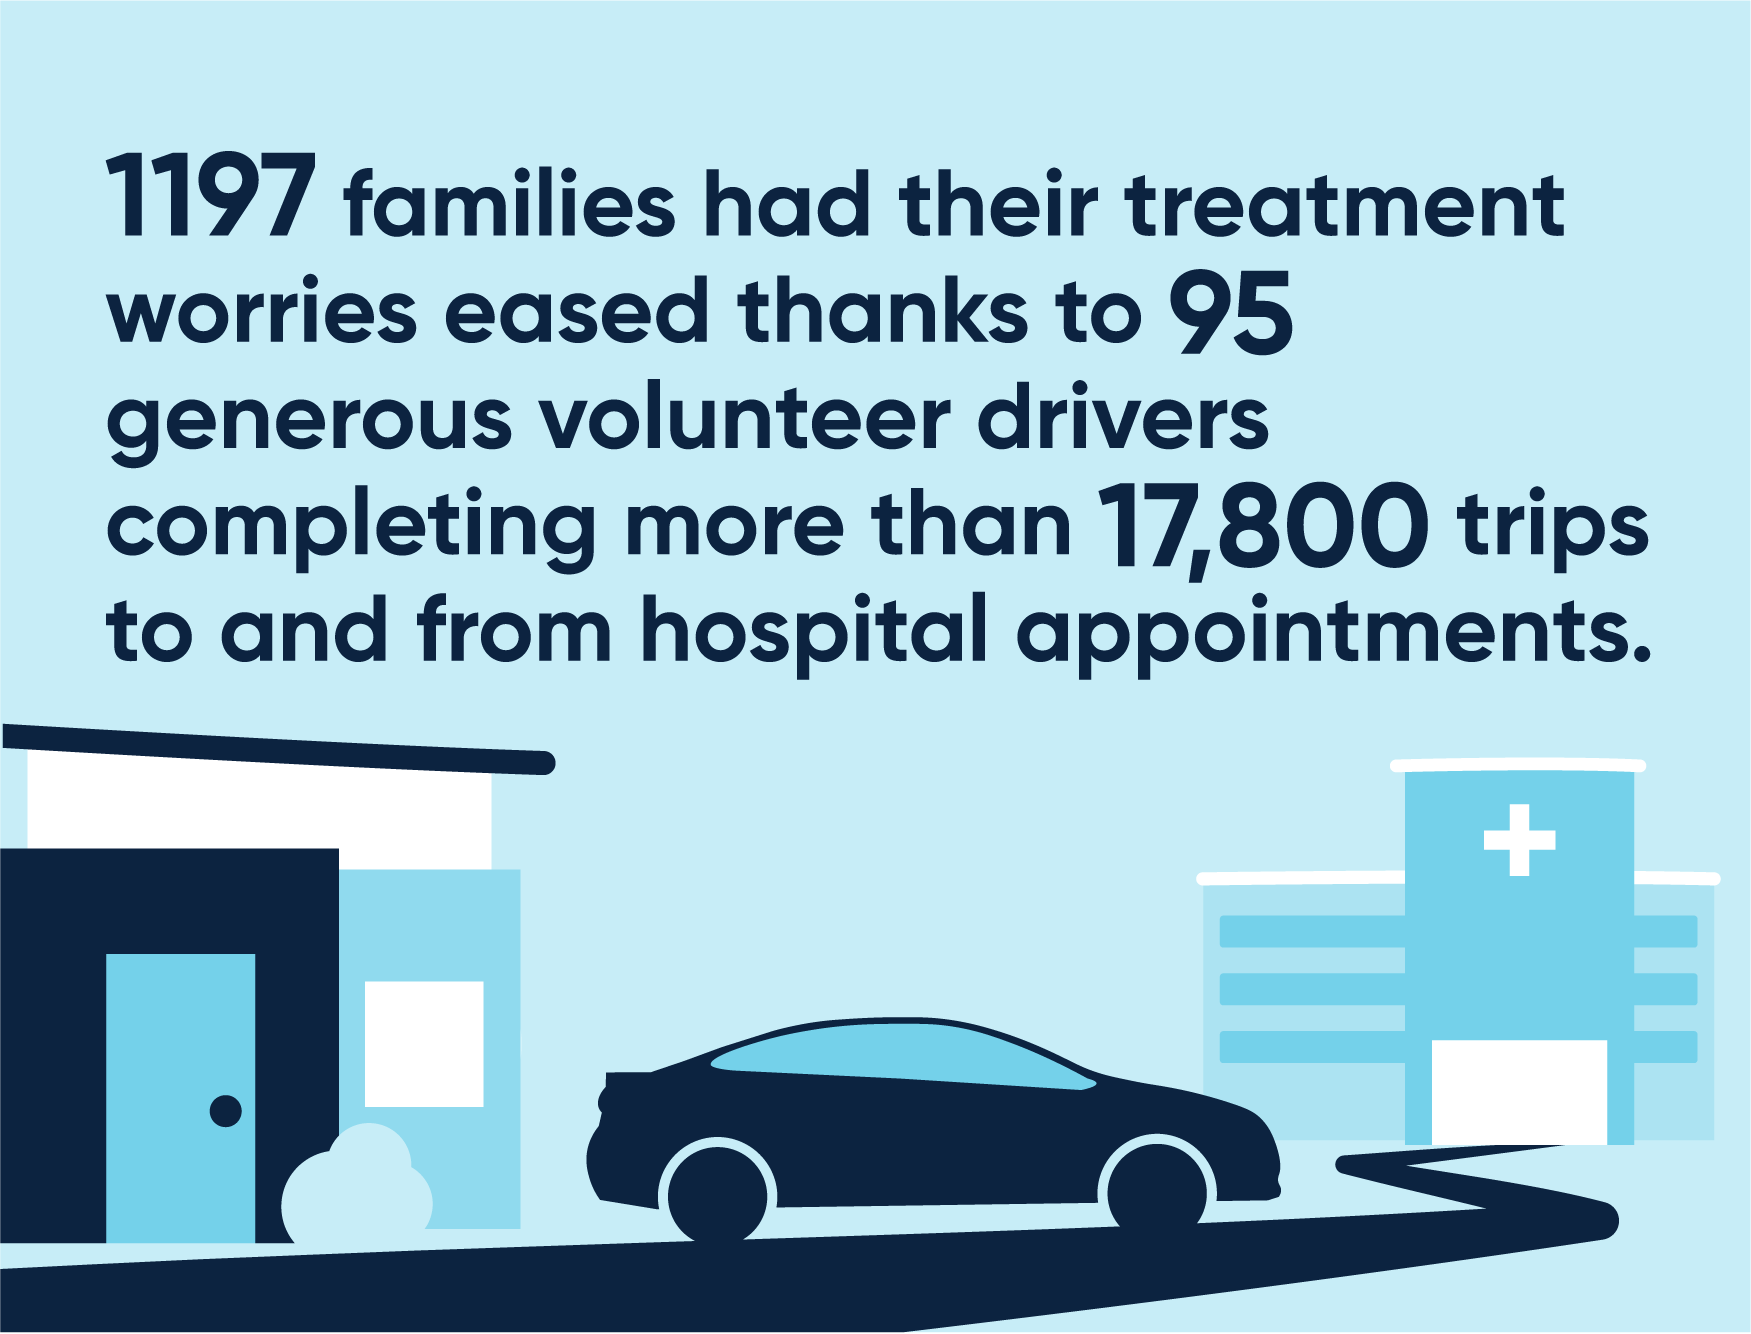 1197 families had treatment worries eased thanks to 95 volunteer drivers completing more than 17,800 trips to and from hospital appointments